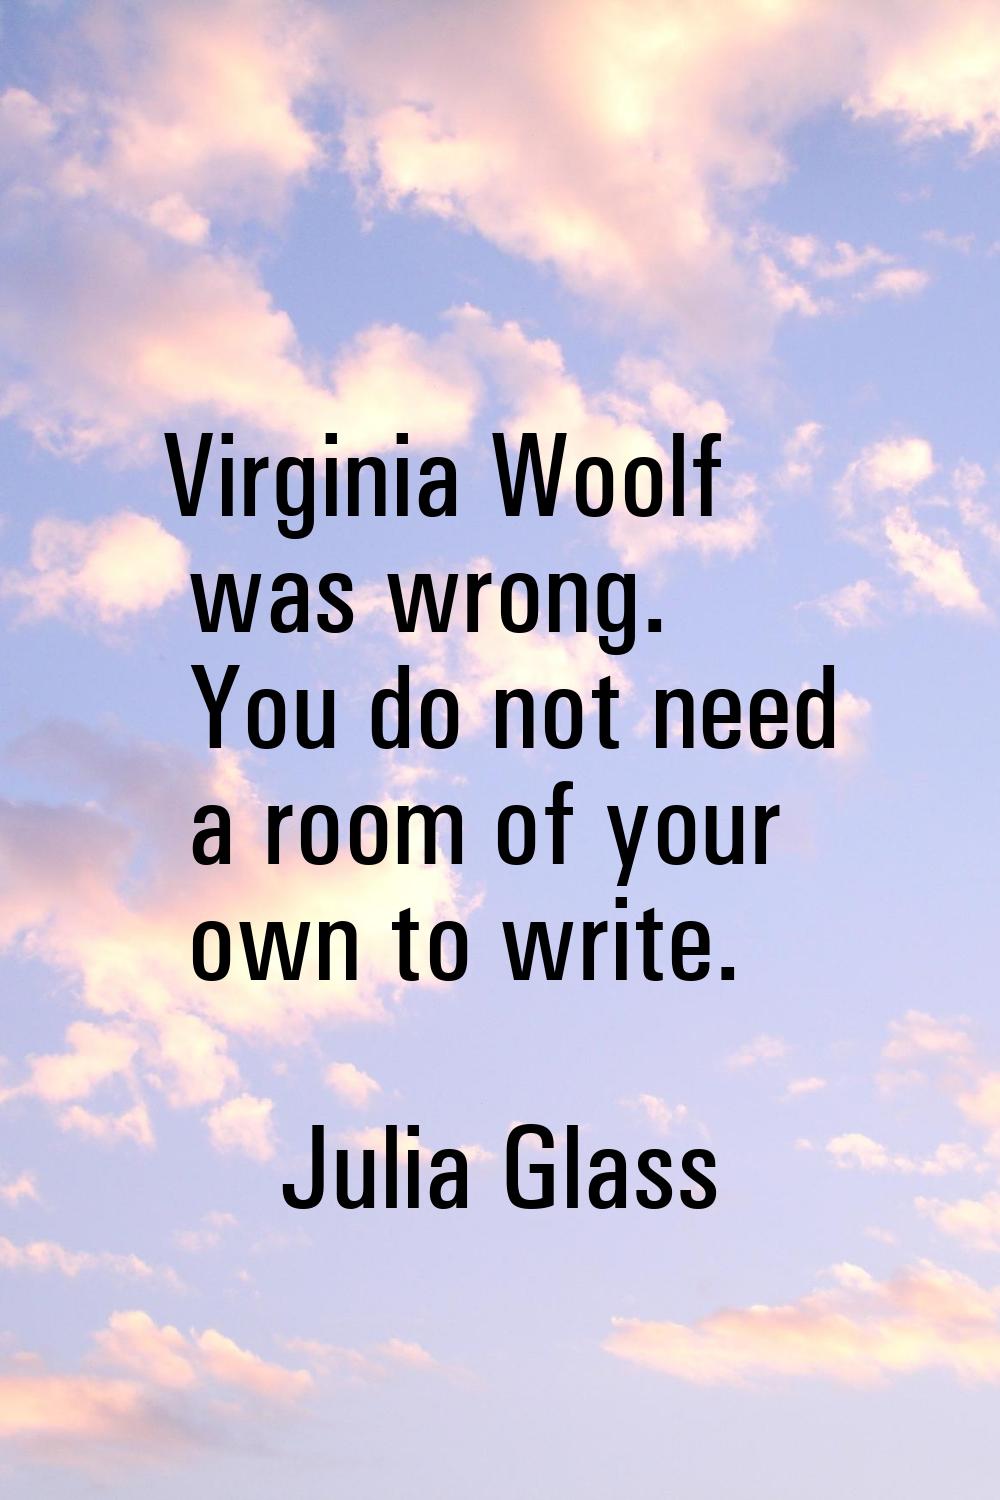 Virginia Woolf was wrong. You do not need a room of your own to write.